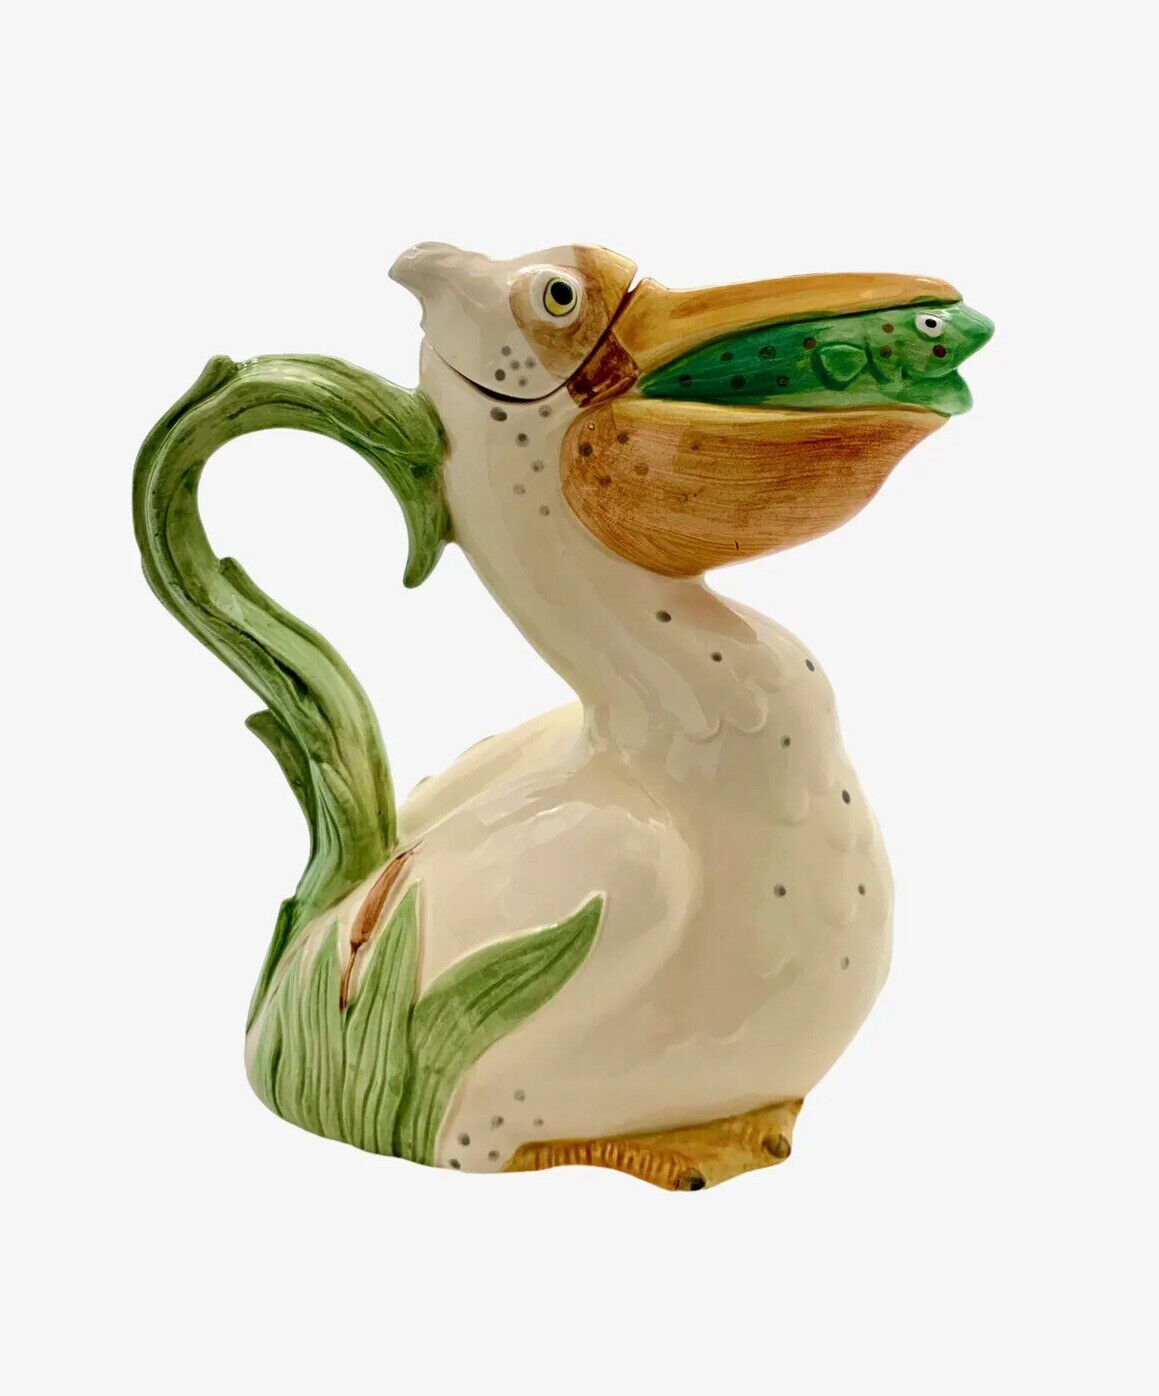 Pelican Fitz and Floyd F&F Lidded Pitcher Adorable Summer Kitchen Dinning Decor